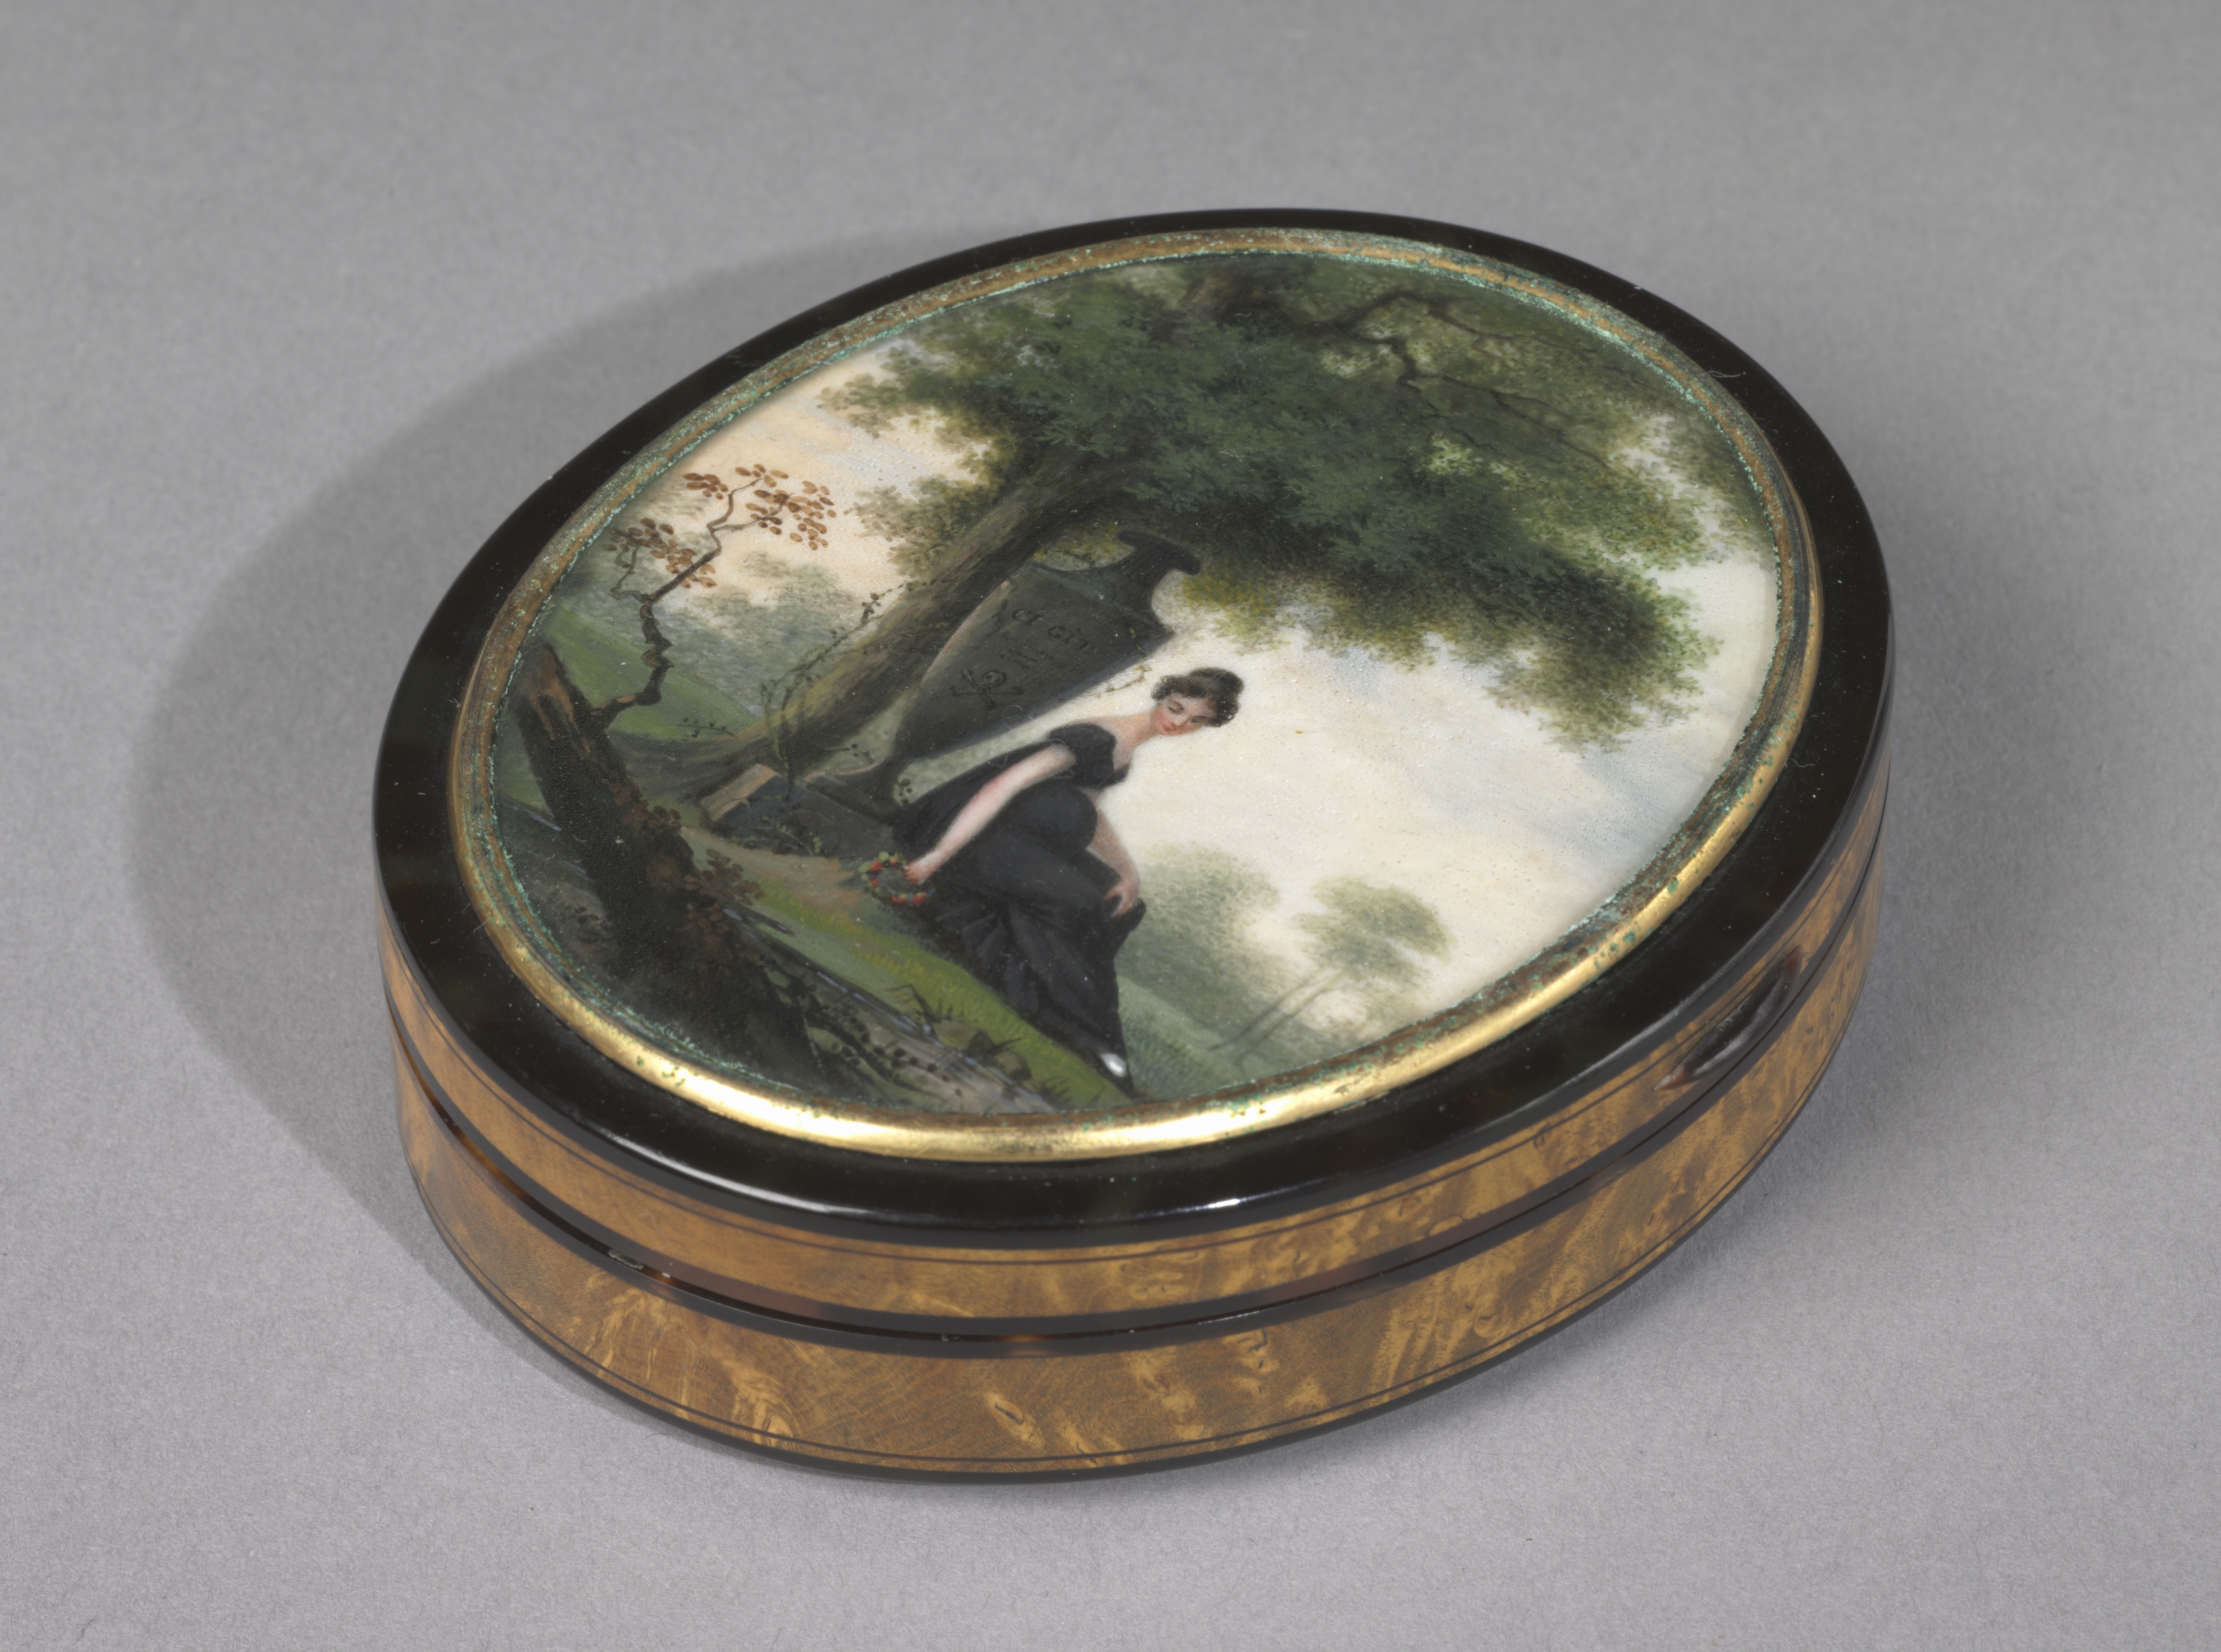 Snuff Box with Figures